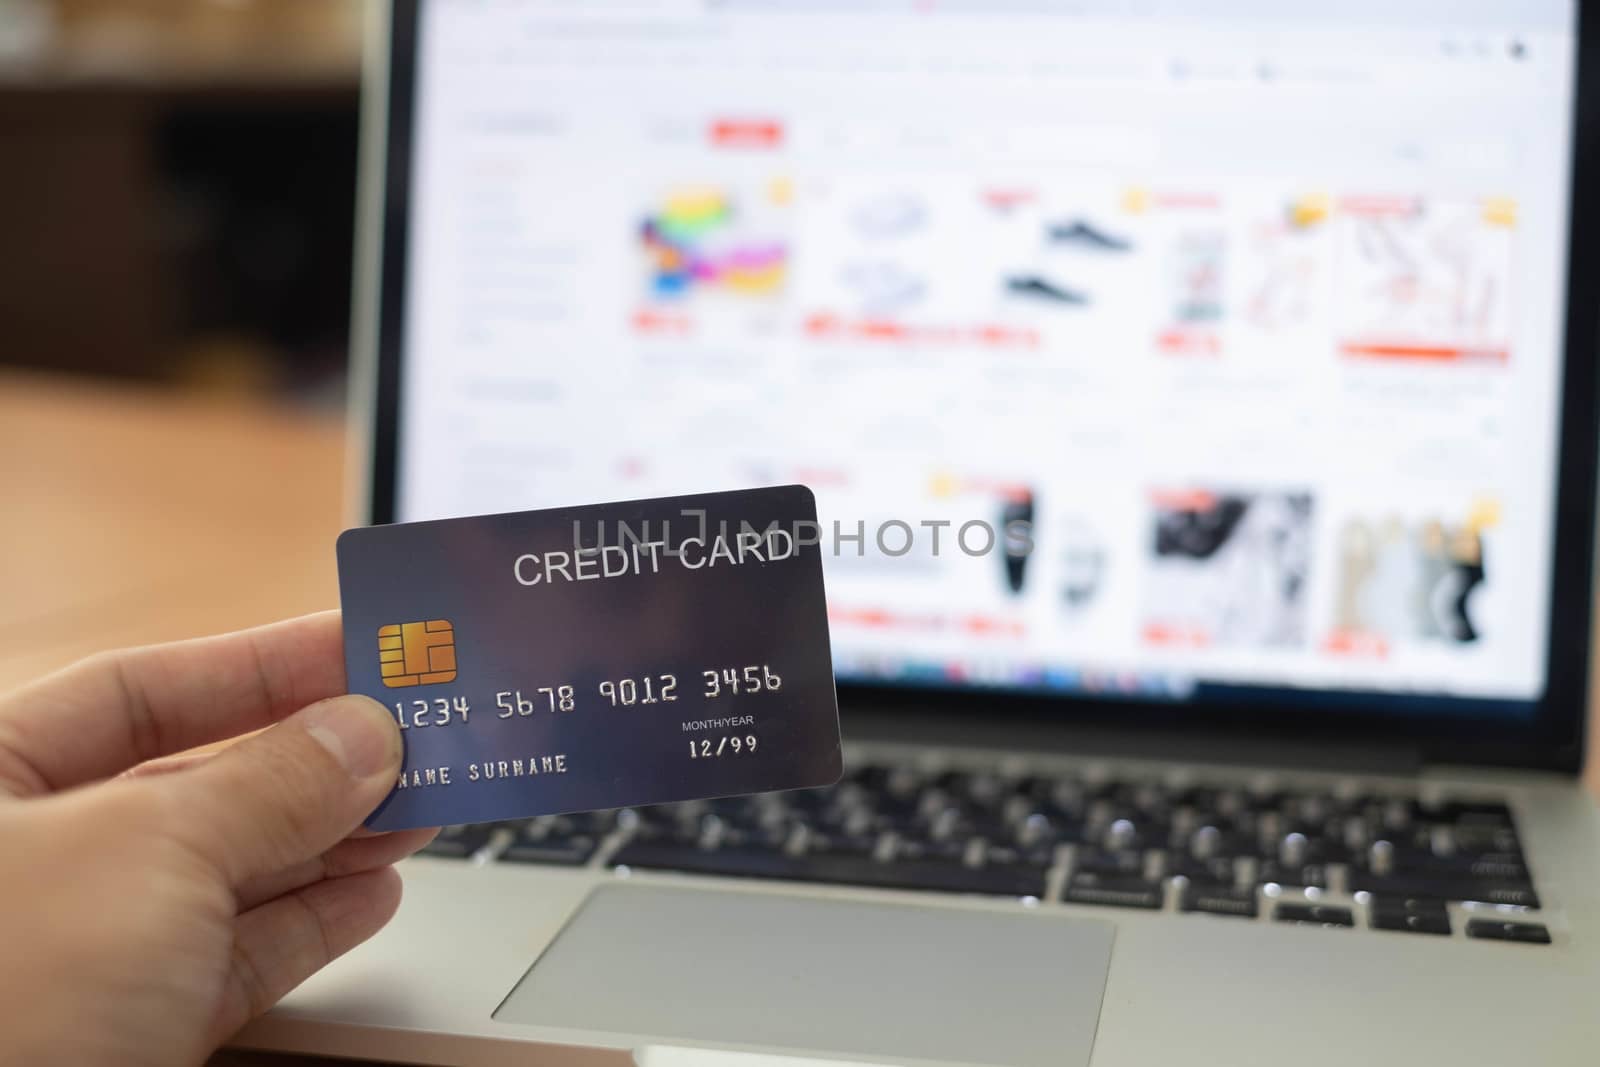 Hands holding plastic credit card and using laptop for online shopping. Online shopping concept